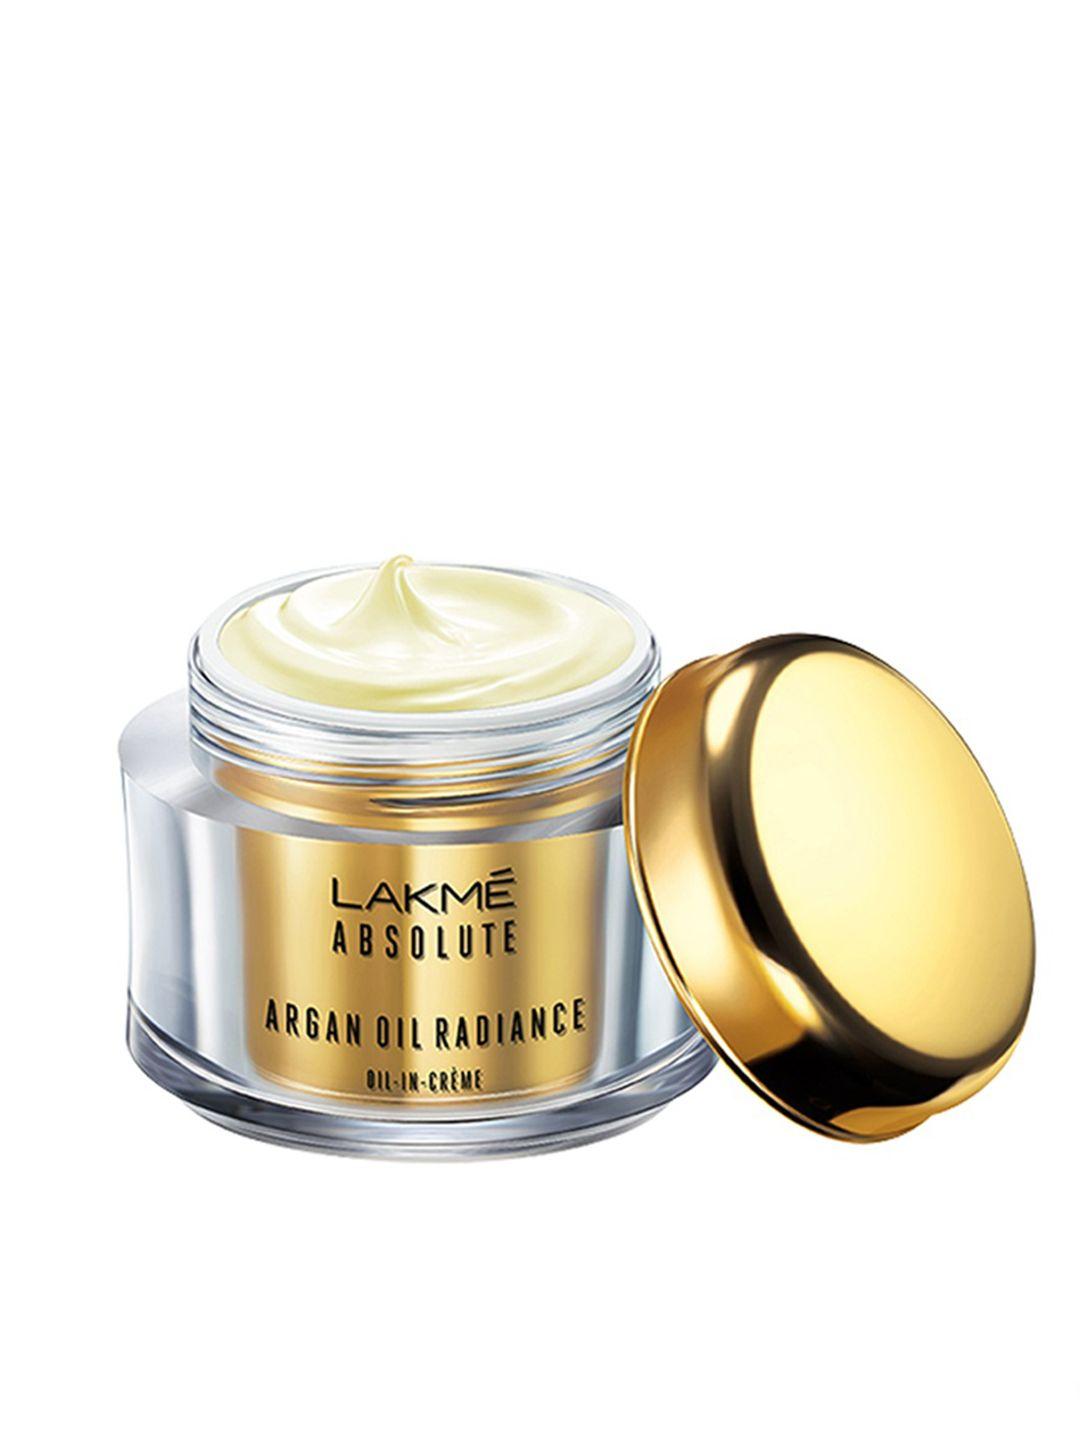 lakme absolute argan oil radiance oil-in-creme with spf 30 p ++ 50g